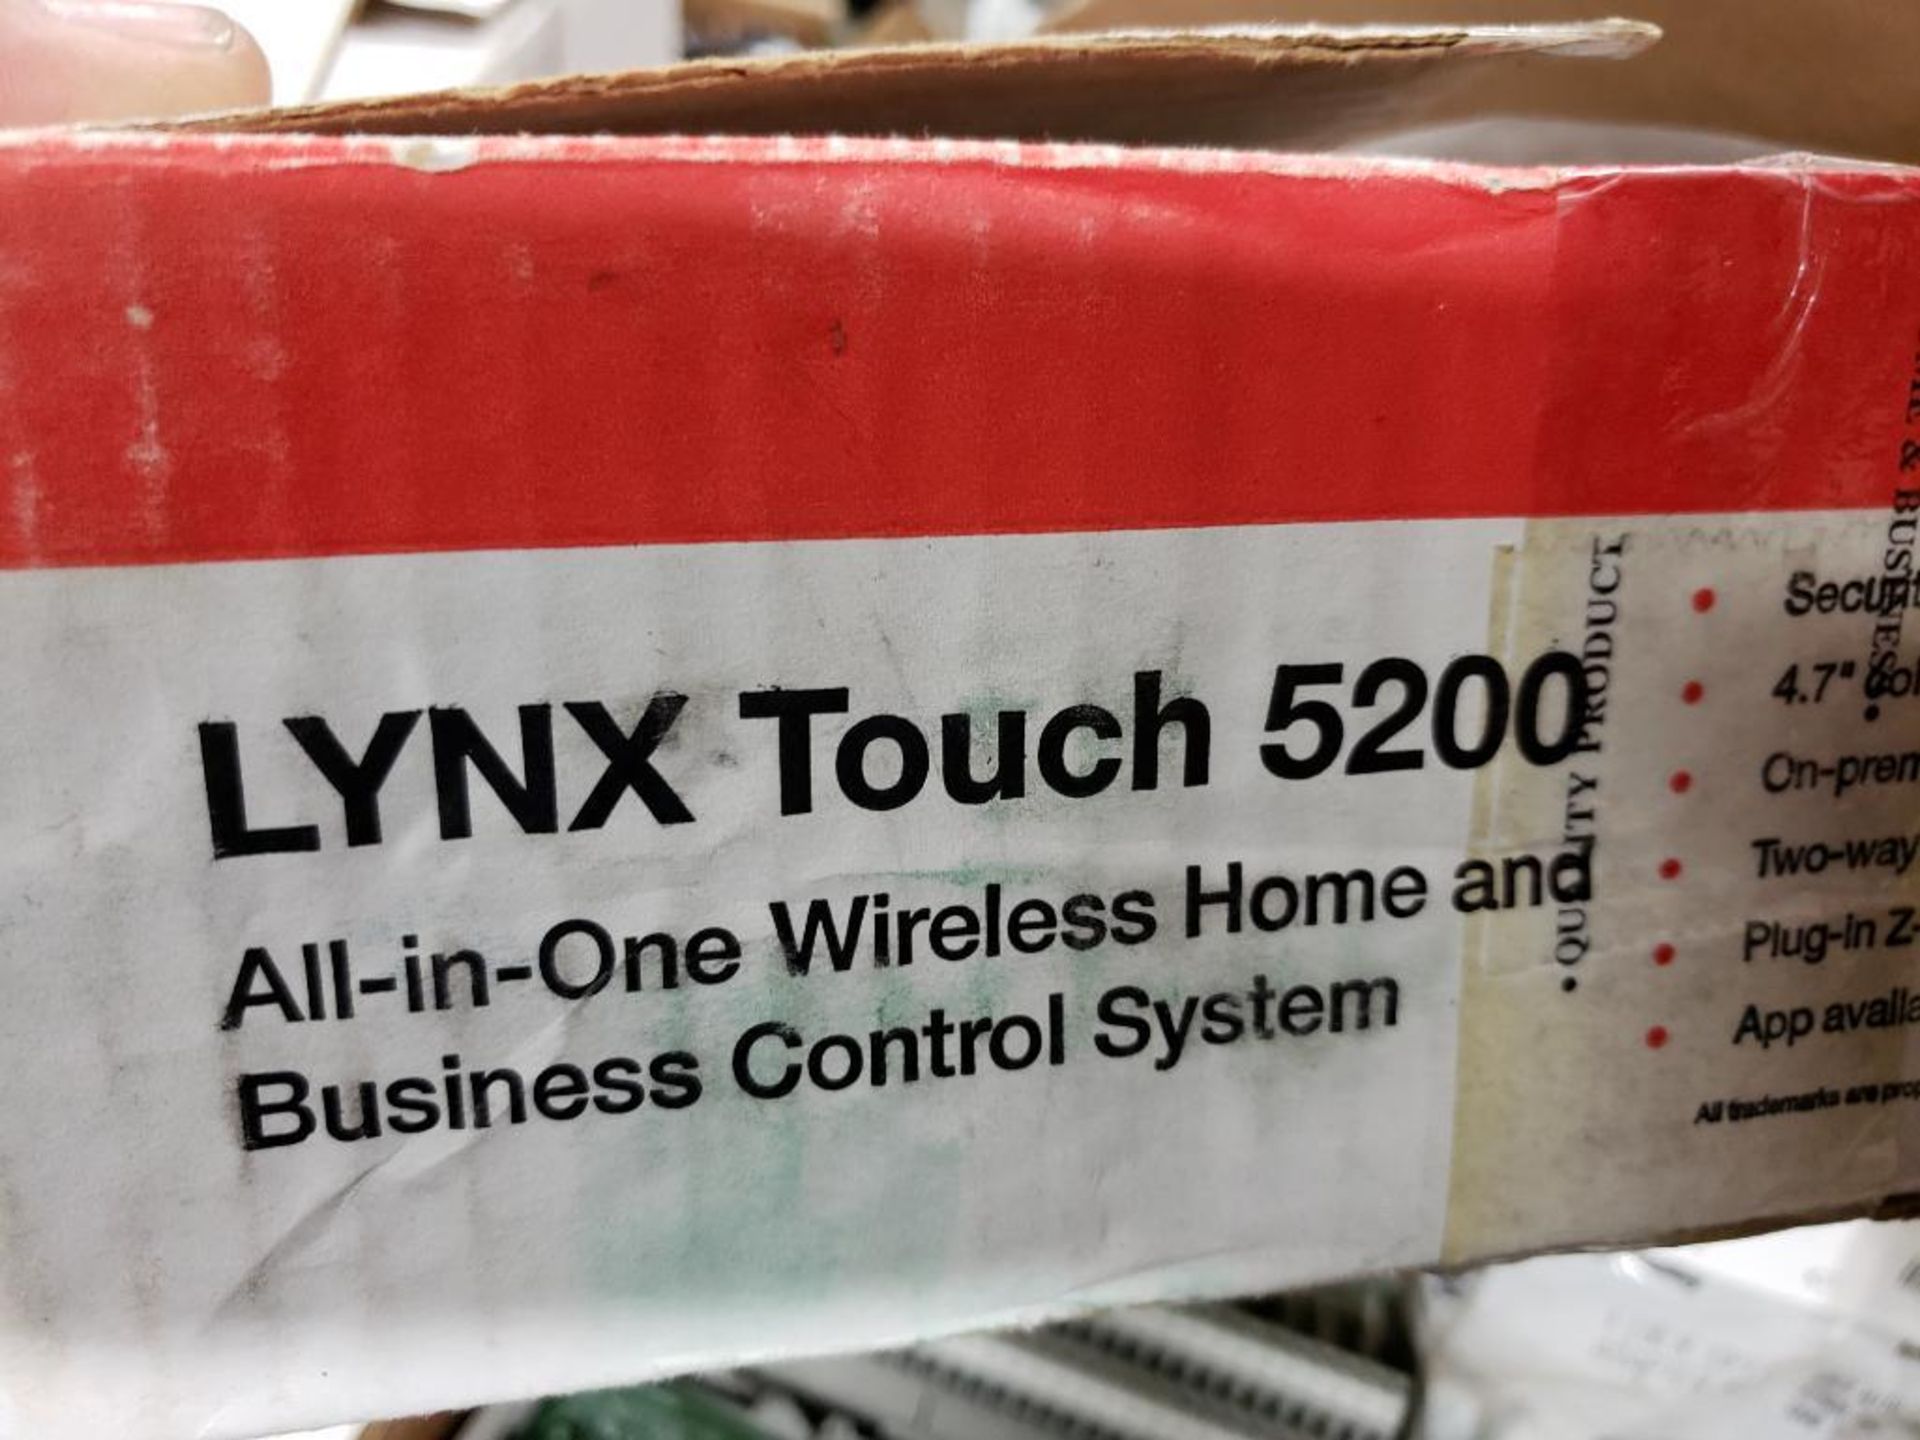 Honeywell LYNX touch L5200/L7000 series security system. New in box. - Image 5 of 5